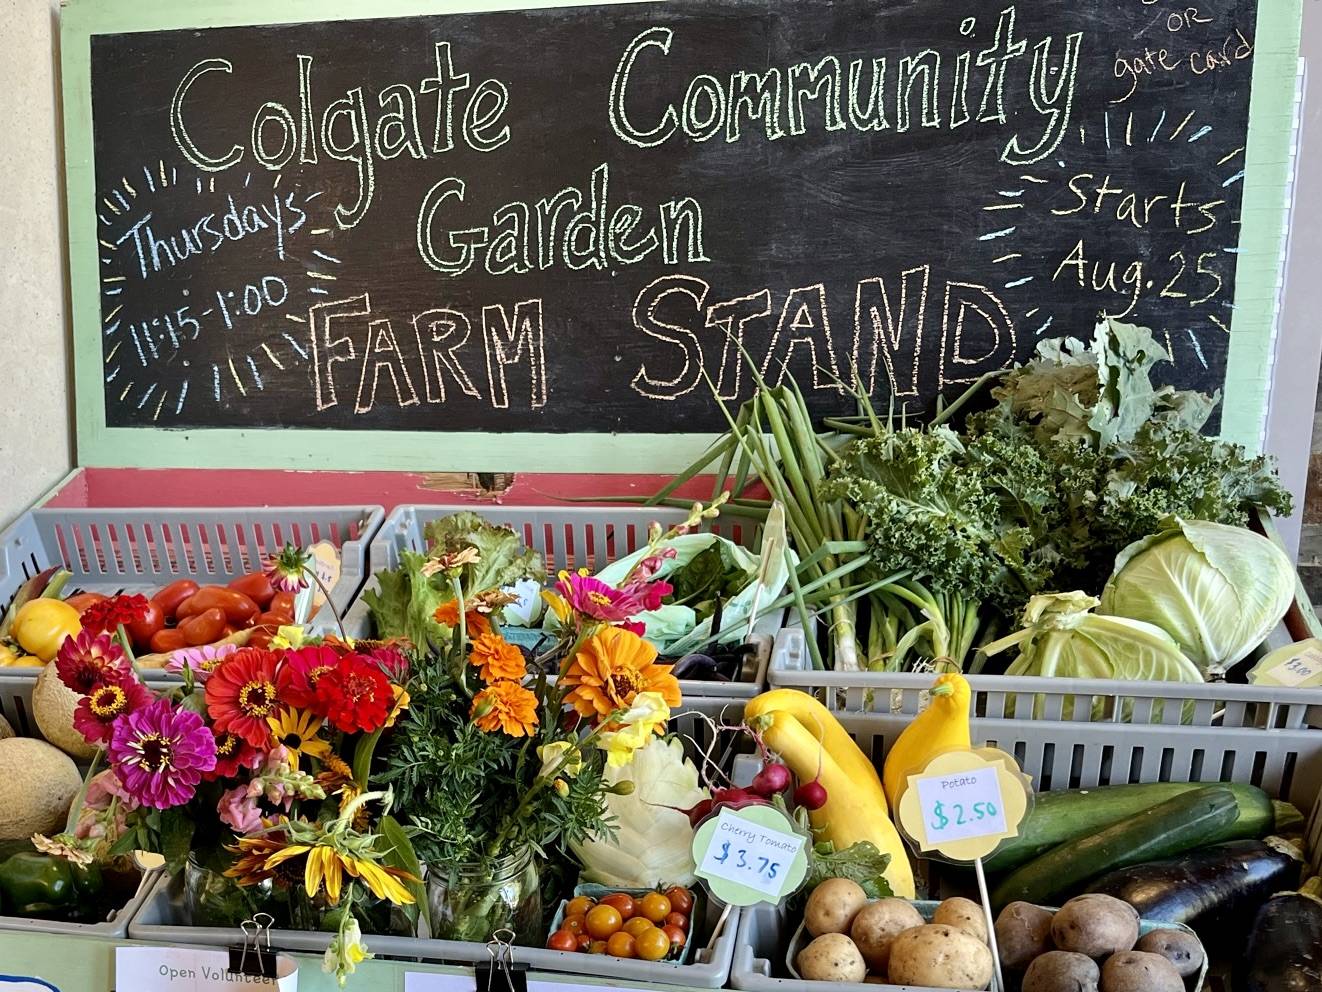 Fresh produce set up on the pale green farm stand. "Colgate Community Garden Farm Stand" is written in chalk on a blackboard behind the produce.